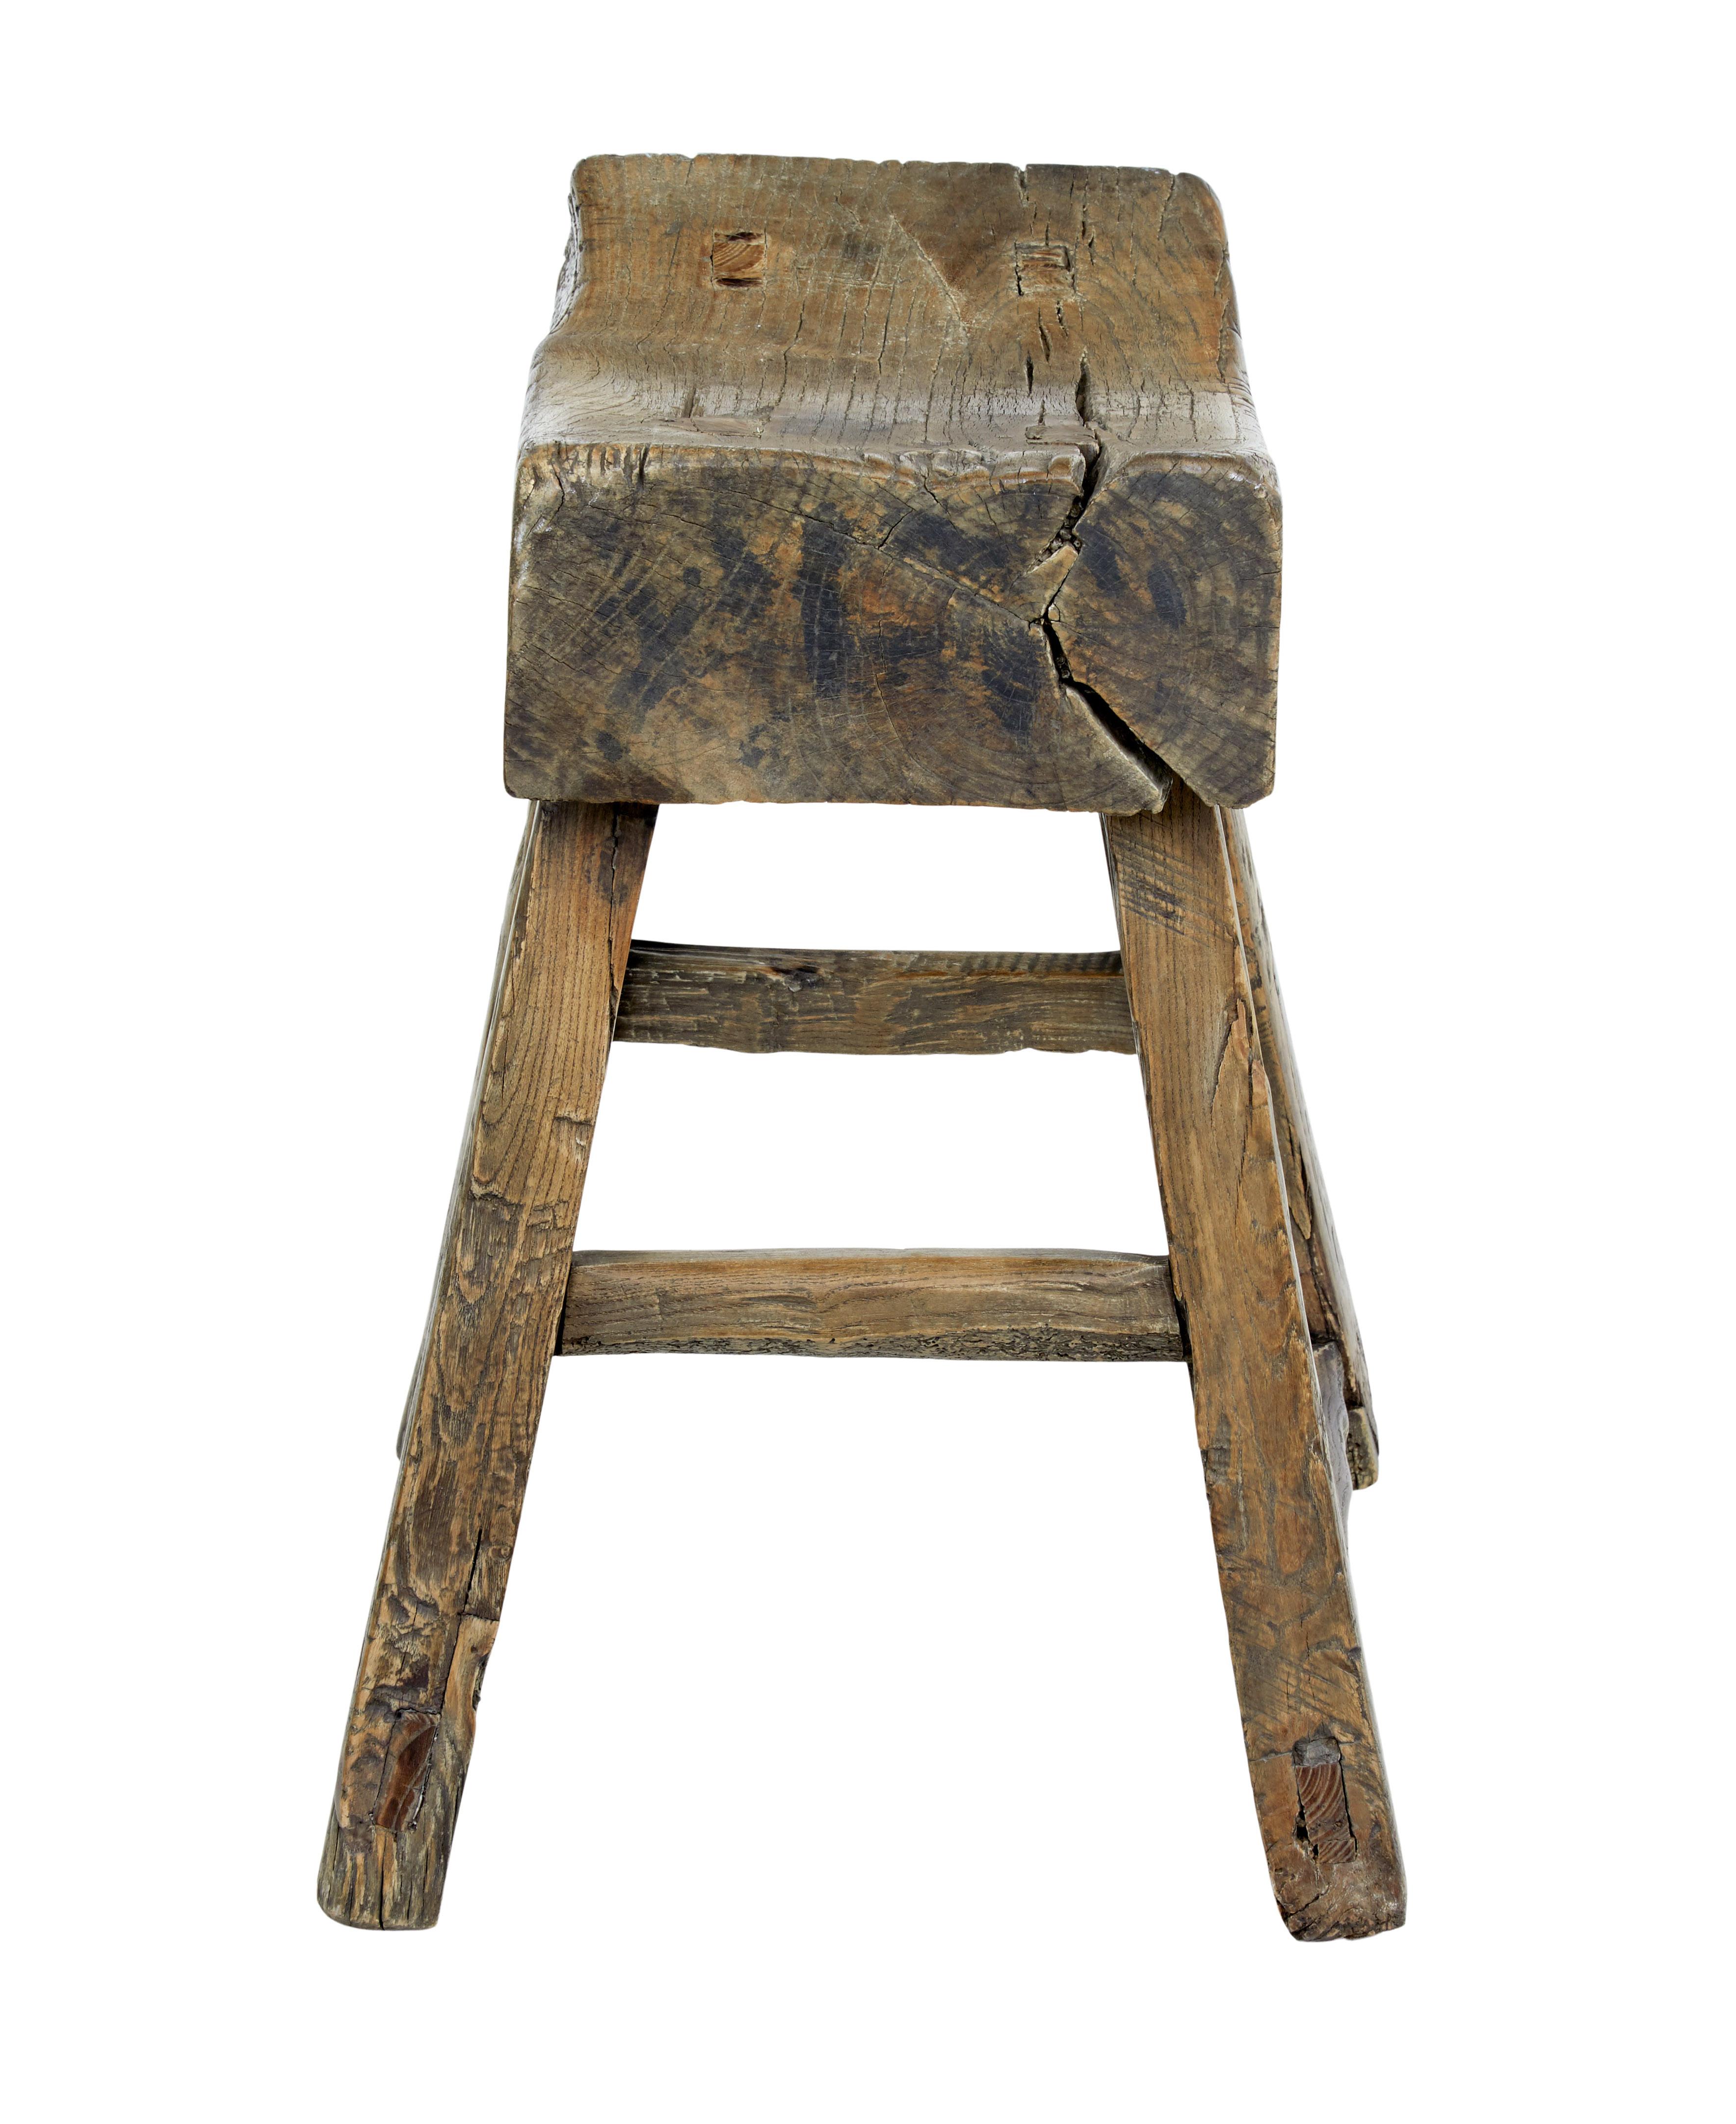 Hand-Crafted 19th Century Chinese Qing Hardwood Stool